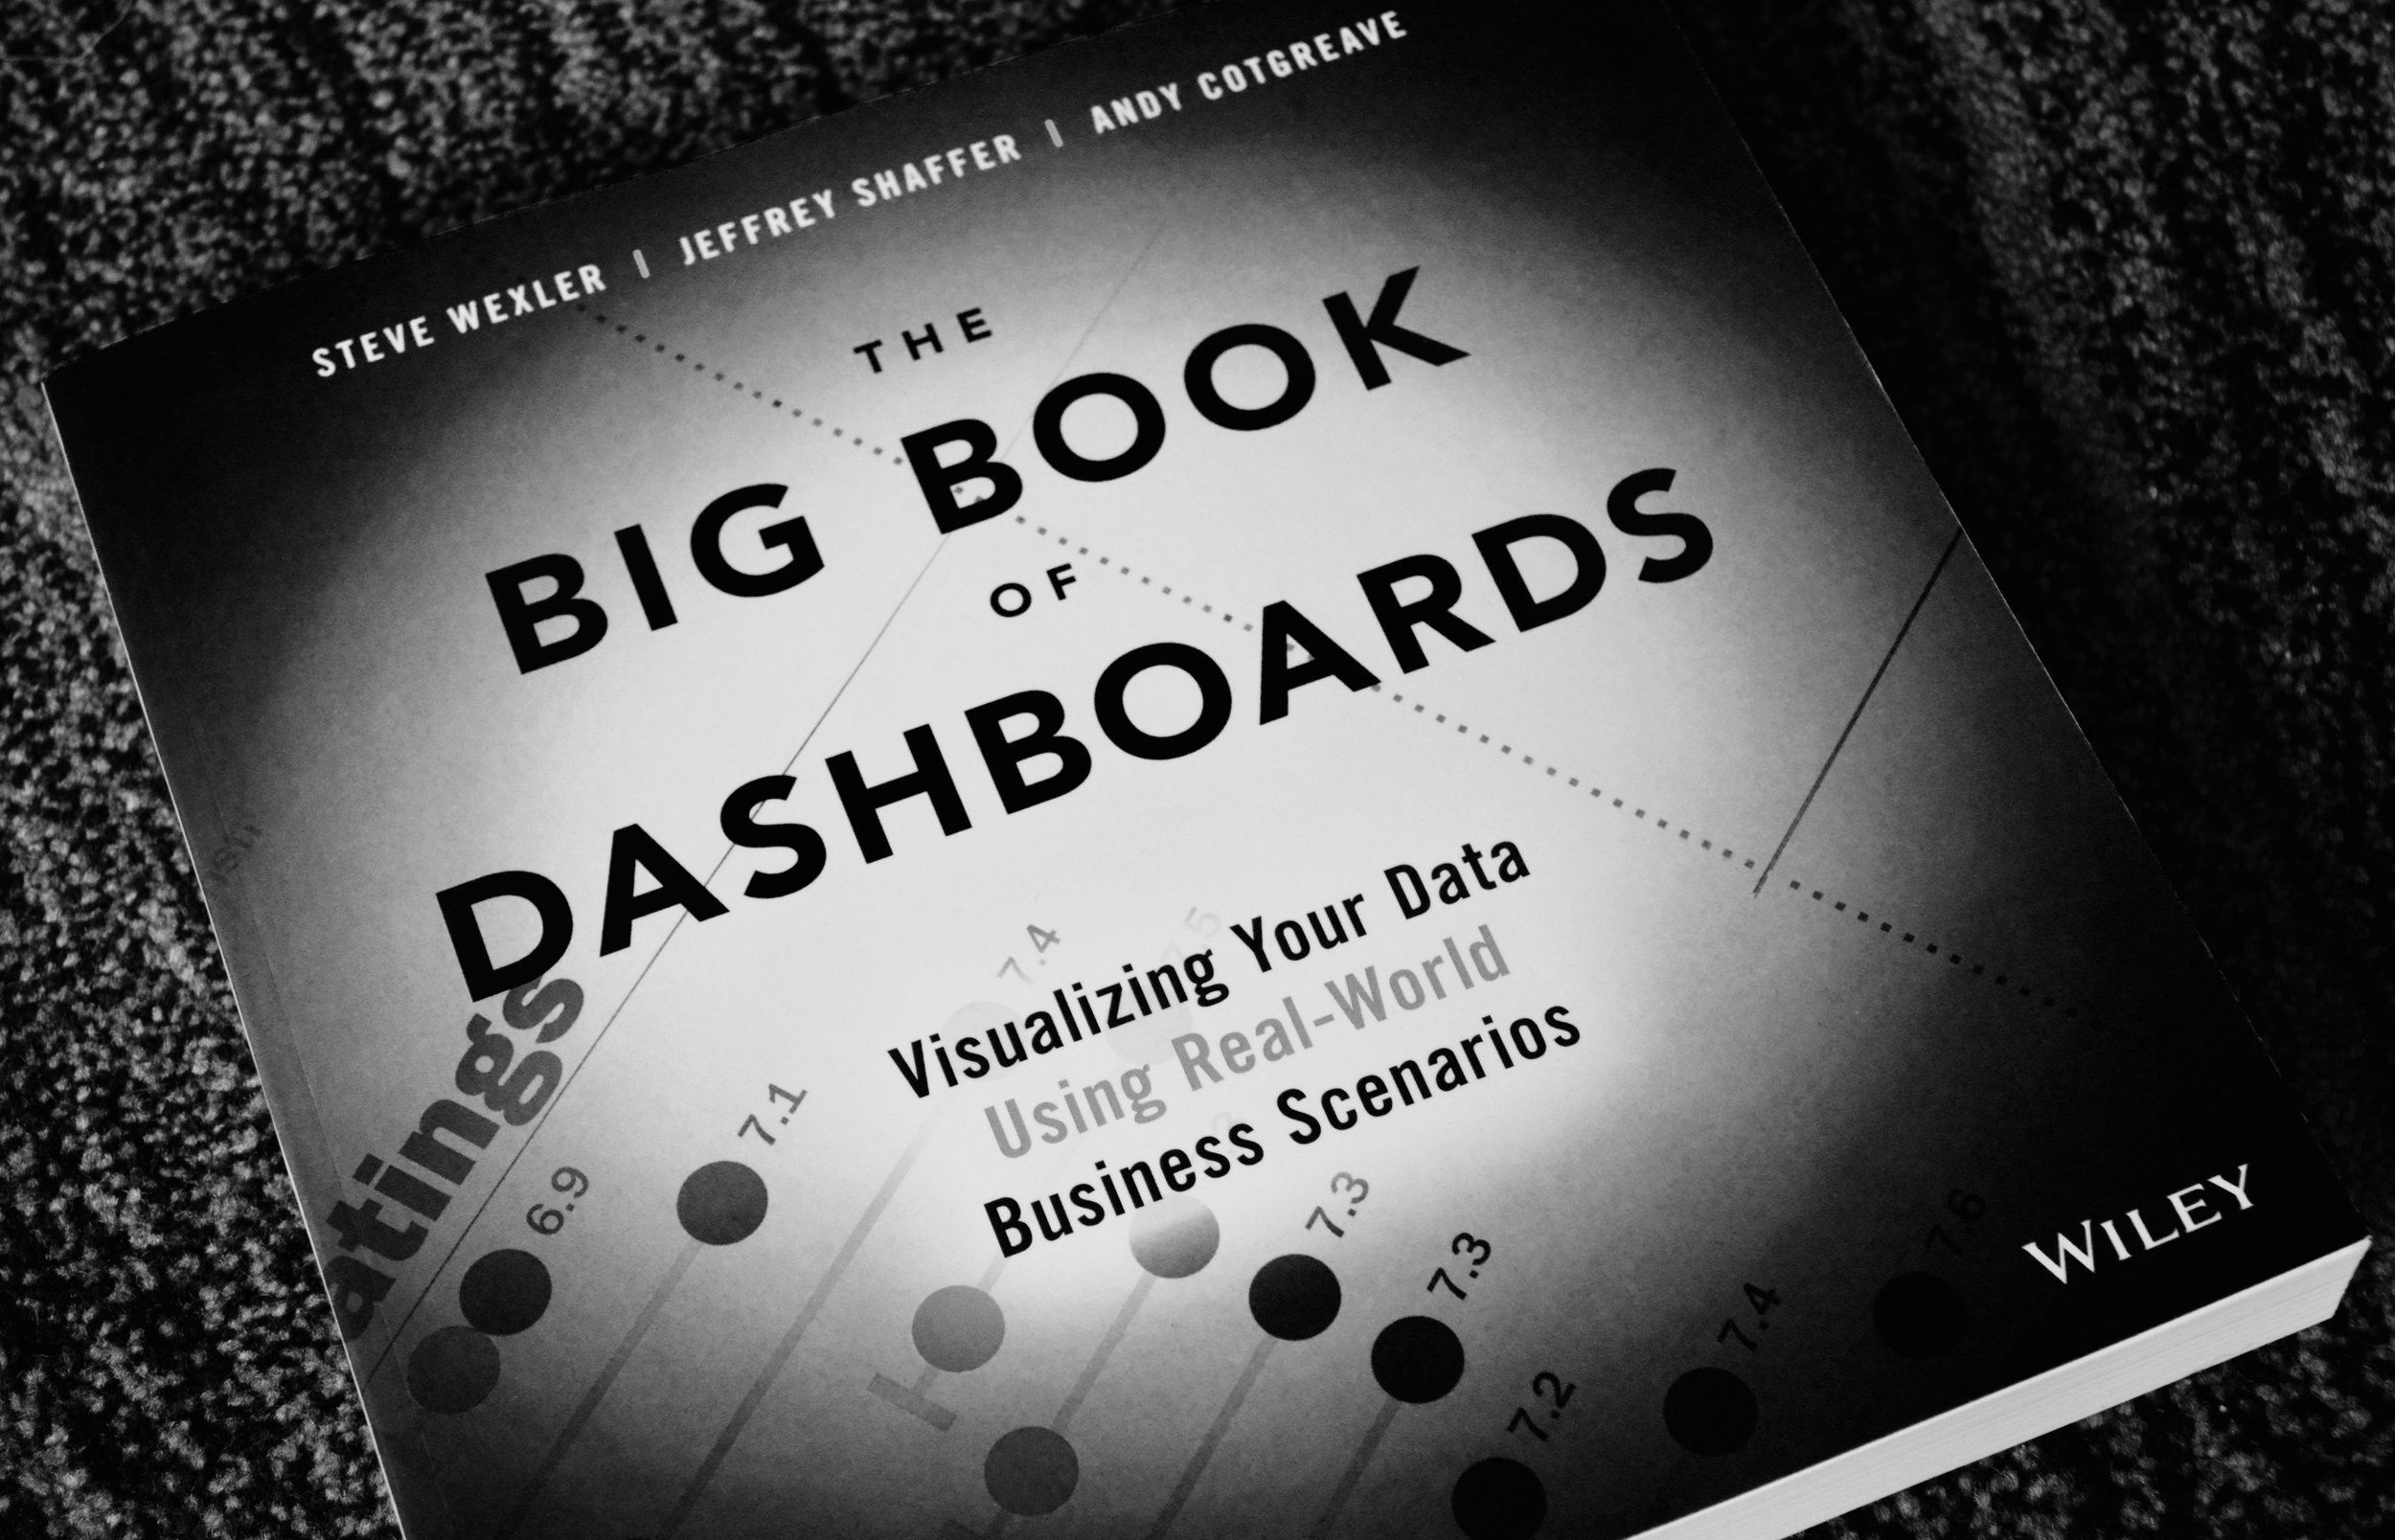 Business dashboards with real-world data